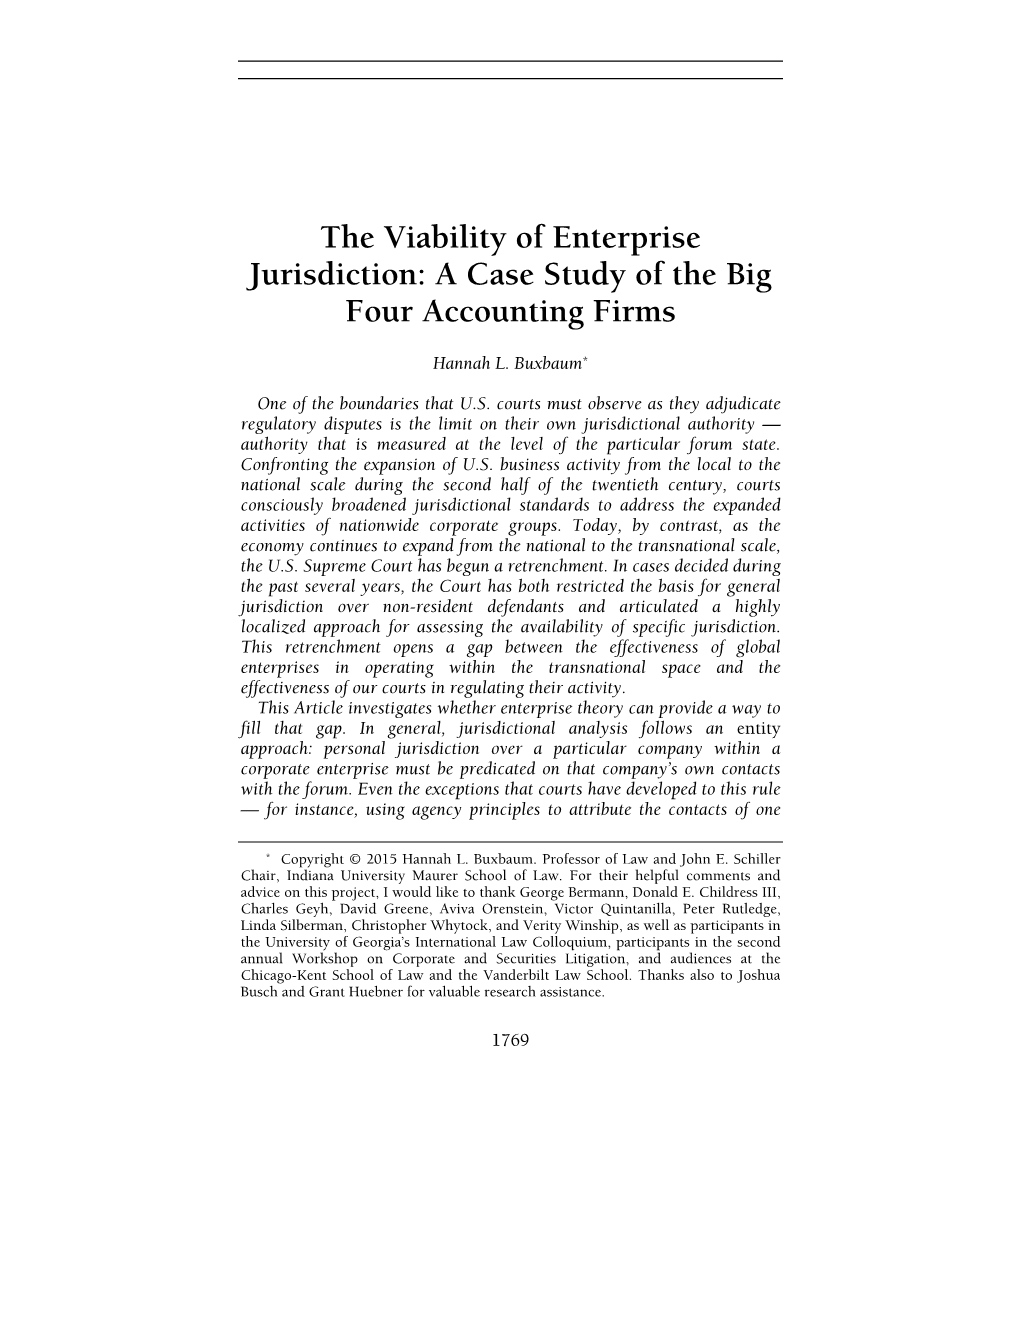 The Viability of Enterprise Jurisdiction: a Case Study of the Big Four Accounting Firms